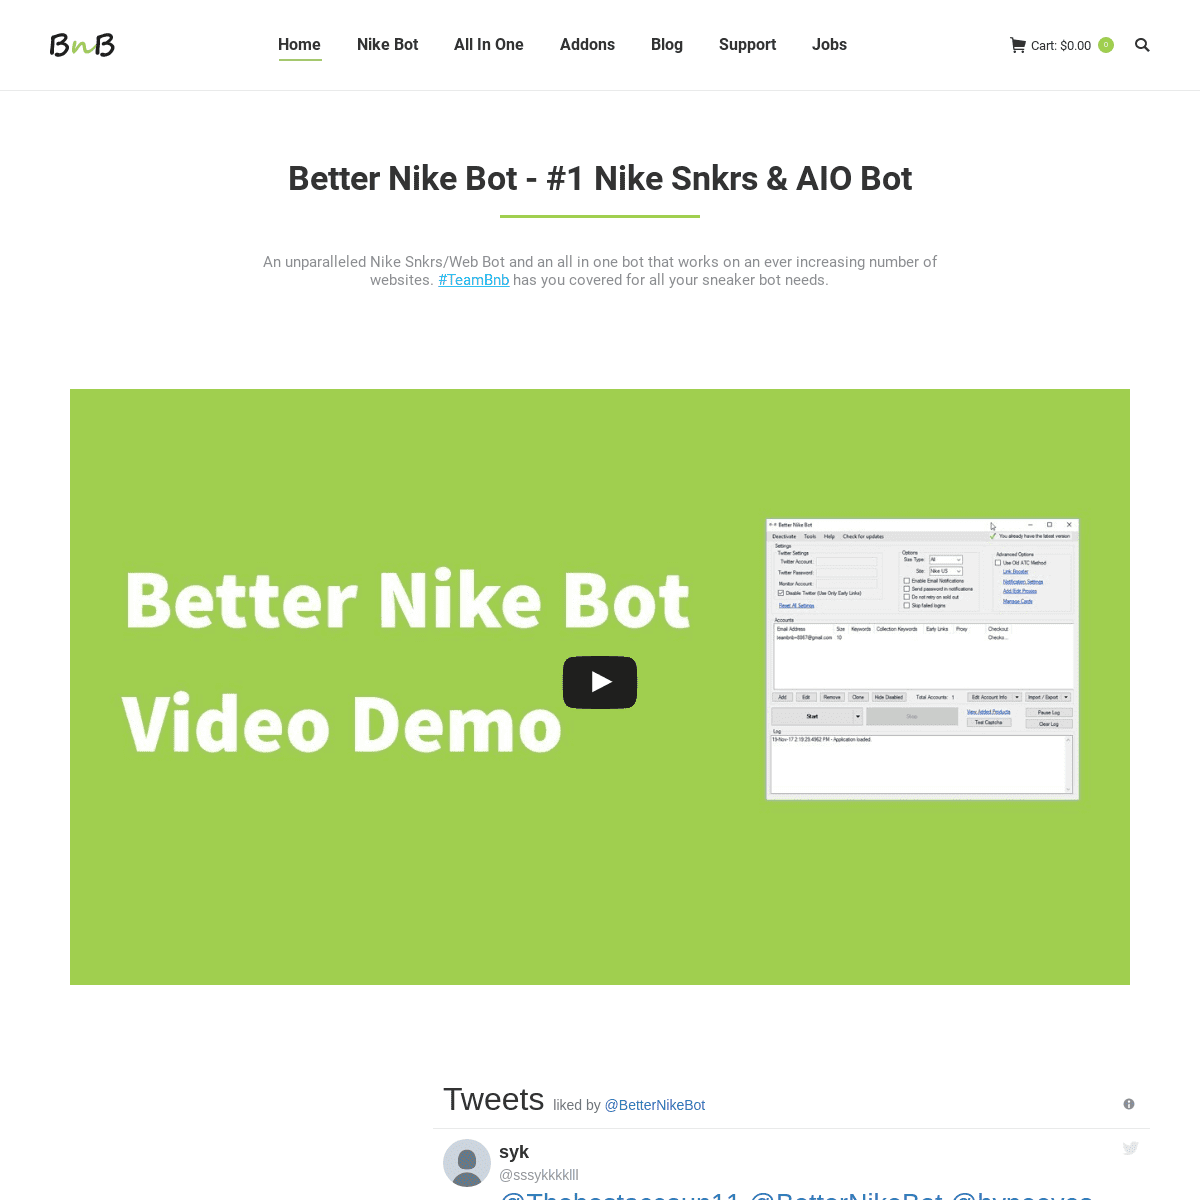 Better Nike Bot - Nike Snkrs and All in One Bot